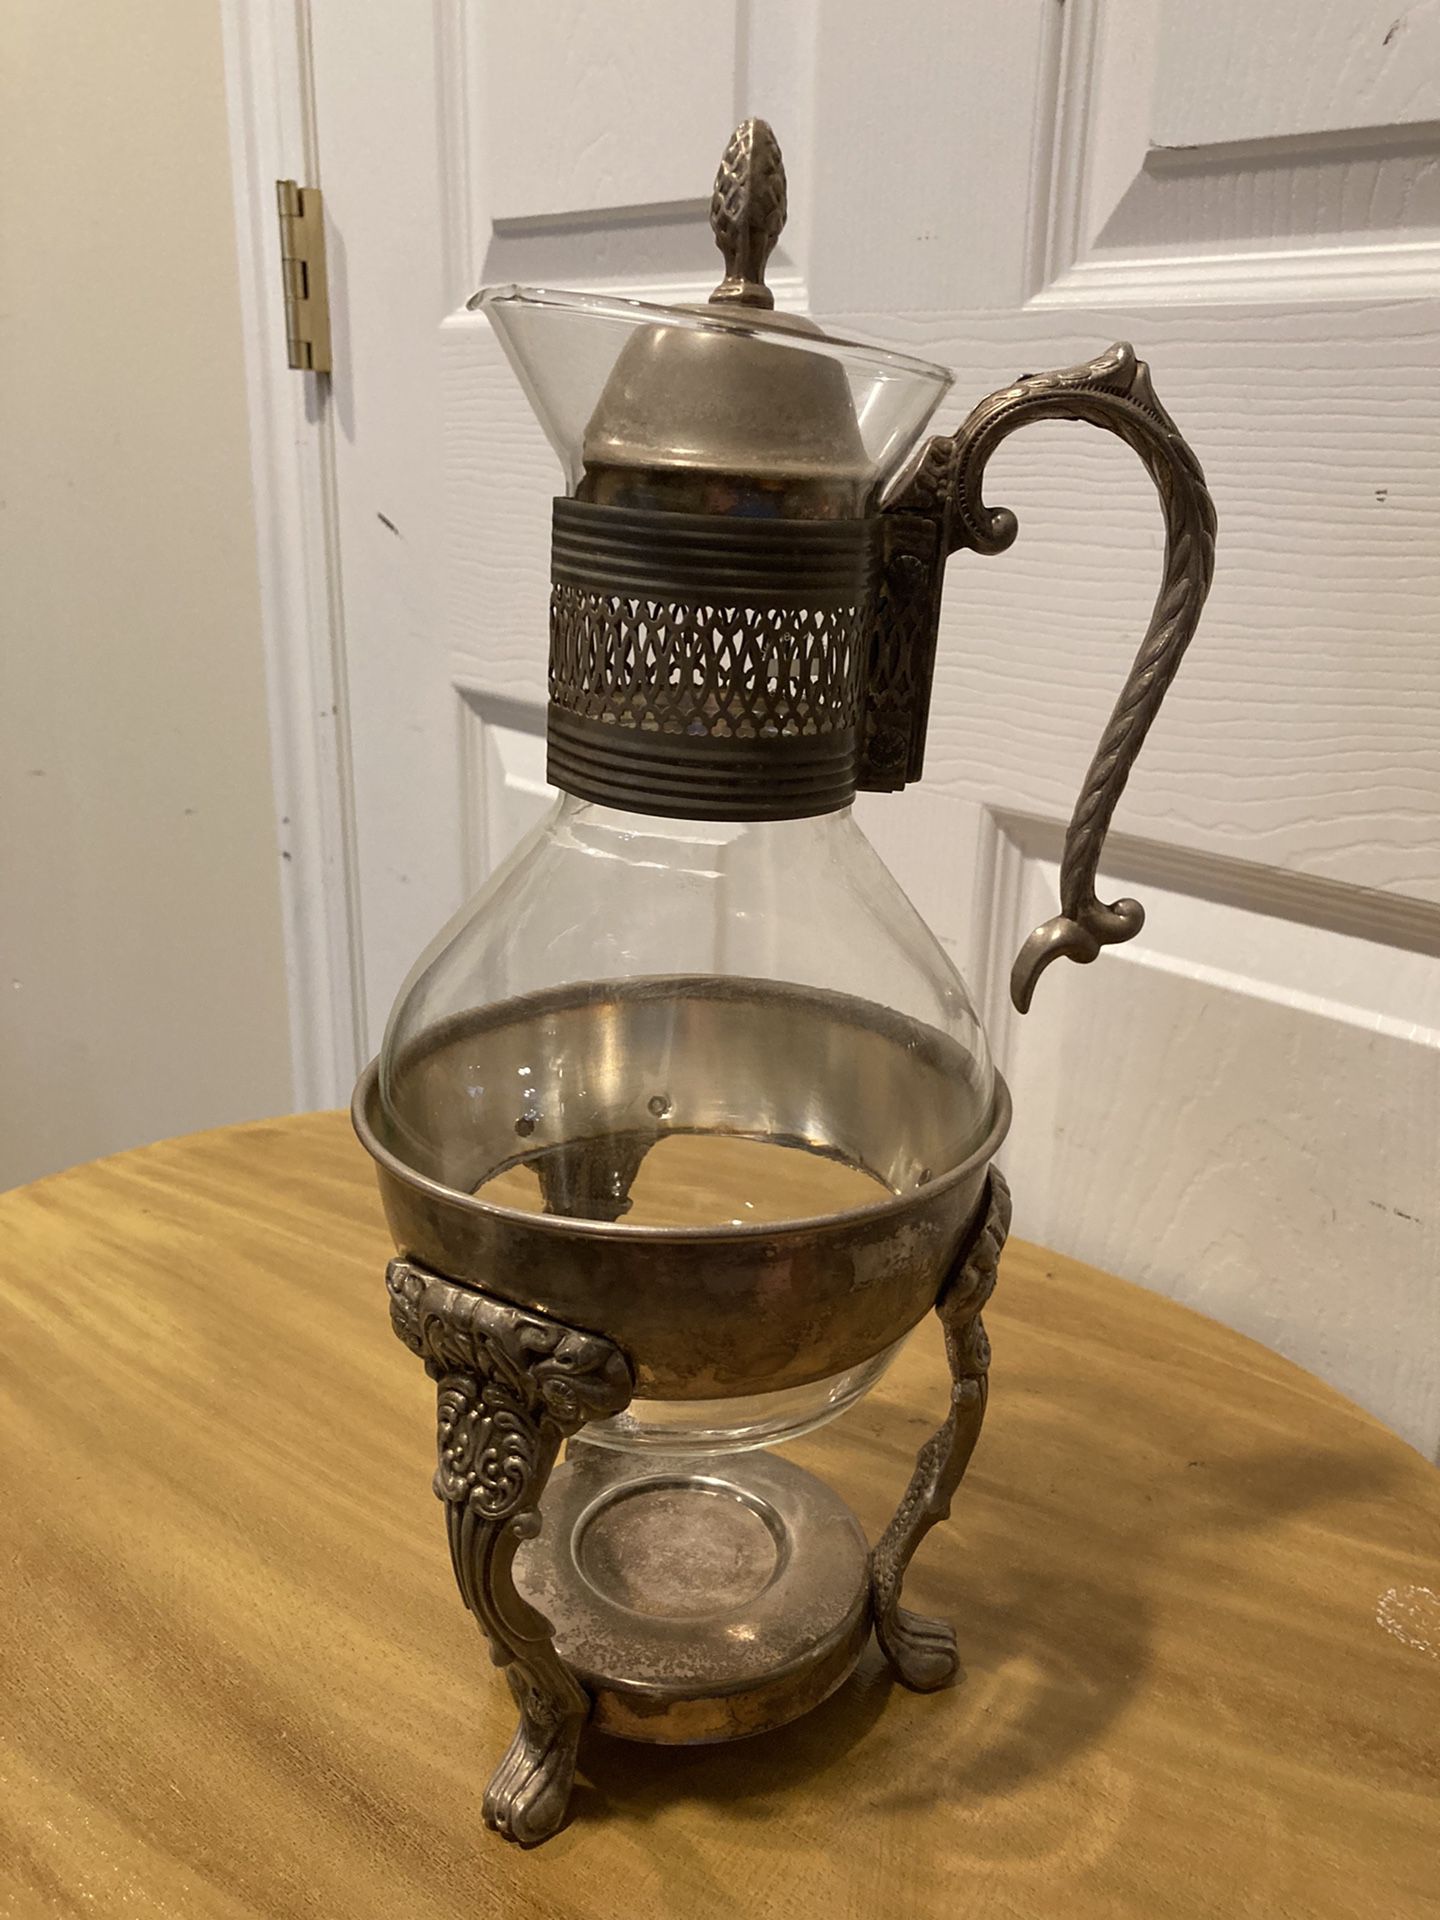 Incredible Antique Glass & Silver Plated Tea/Coffee Carafe!!